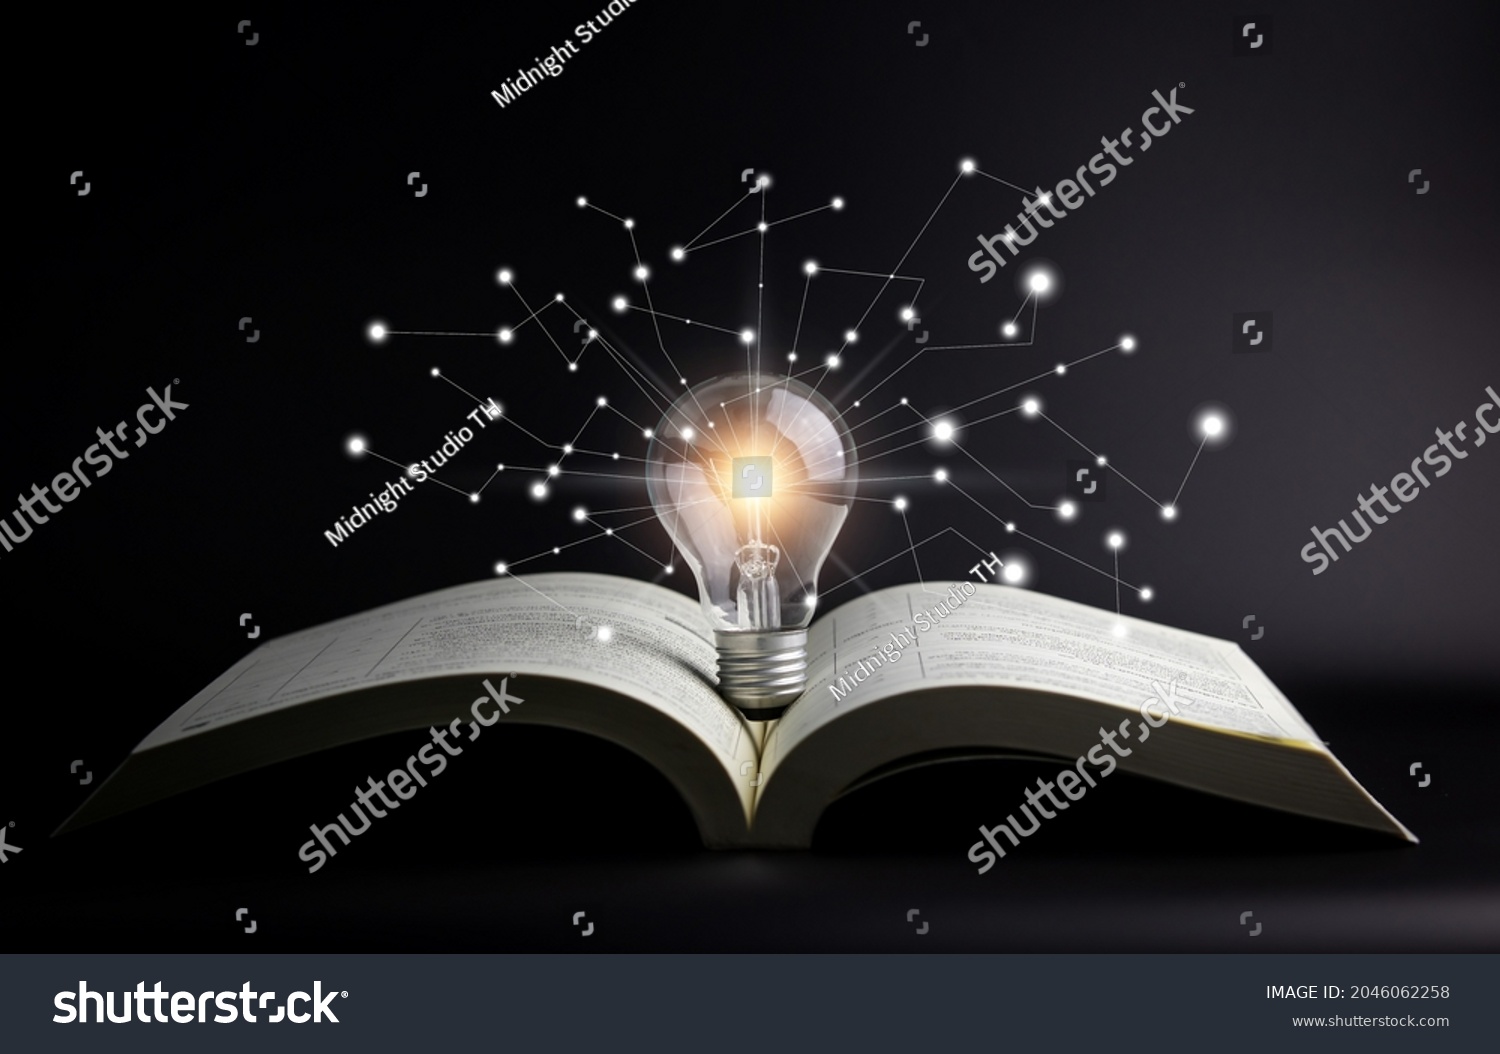 Light bulbs and books. Concept of reading books, knowledge, and searching for new ideas. Innovation and inspiration, Creativity with twinkling lights, the inspiration of ideas. #2046062258